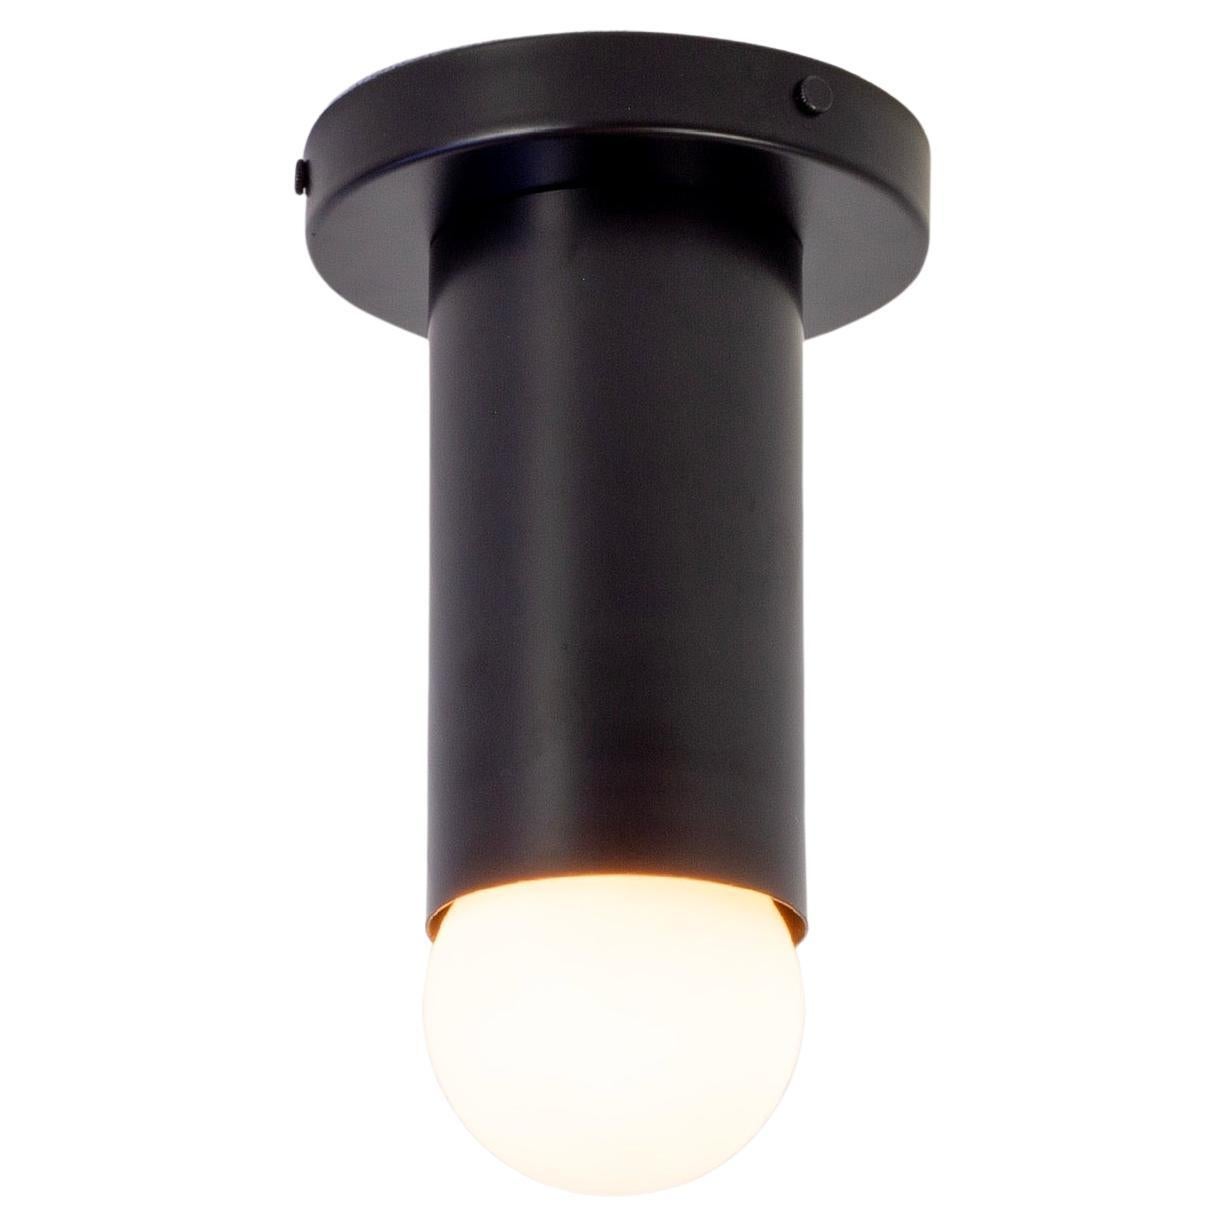 Deep Flush Mount by Research.Lighting, Black, In Stock